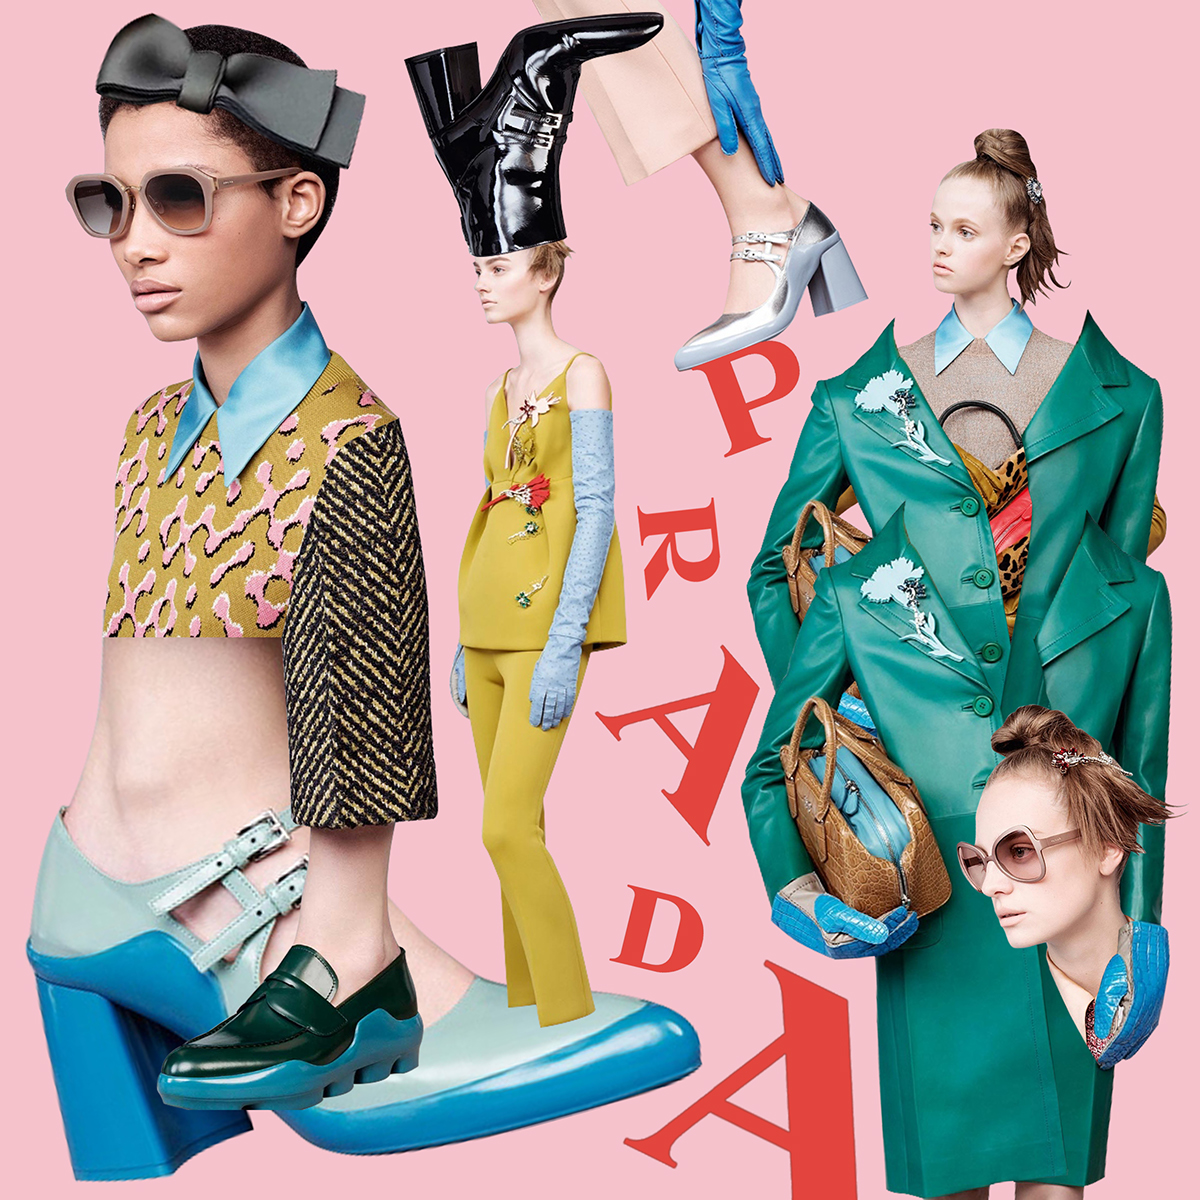 FALL/WINTER 2015 FASHION CAMPAIGN COLLAGES on Behance